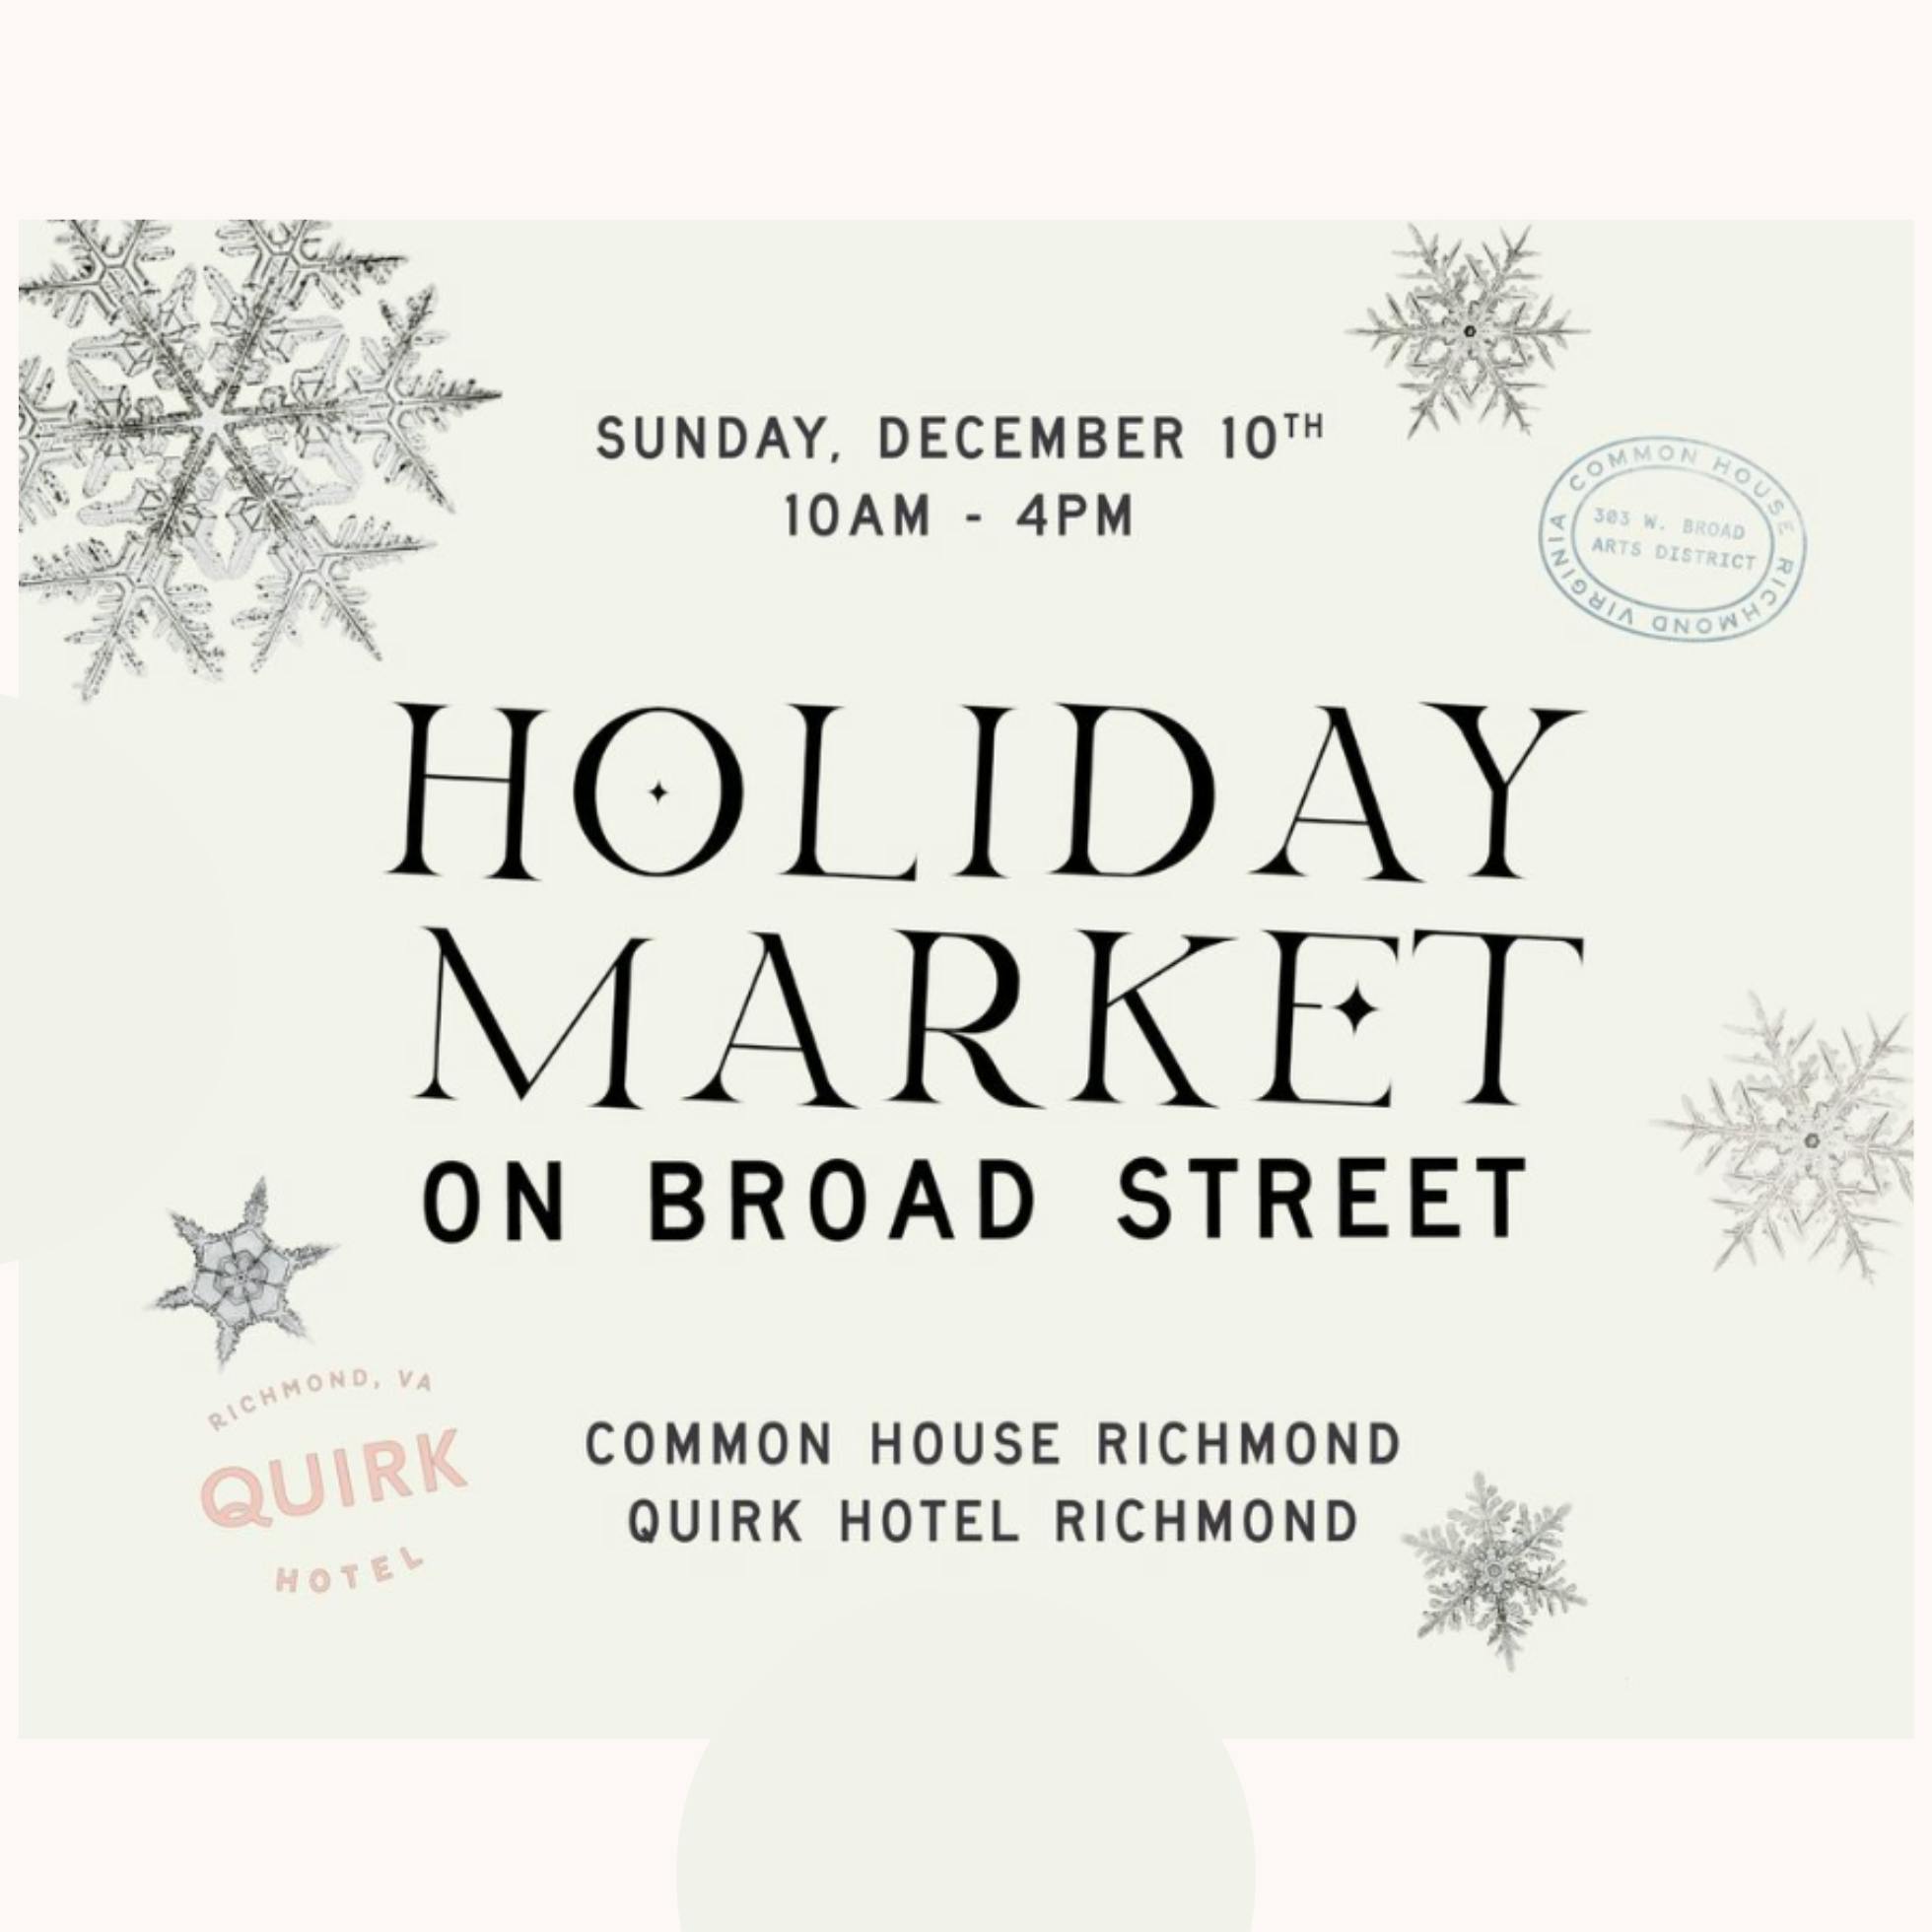 Quirk Holiday Market